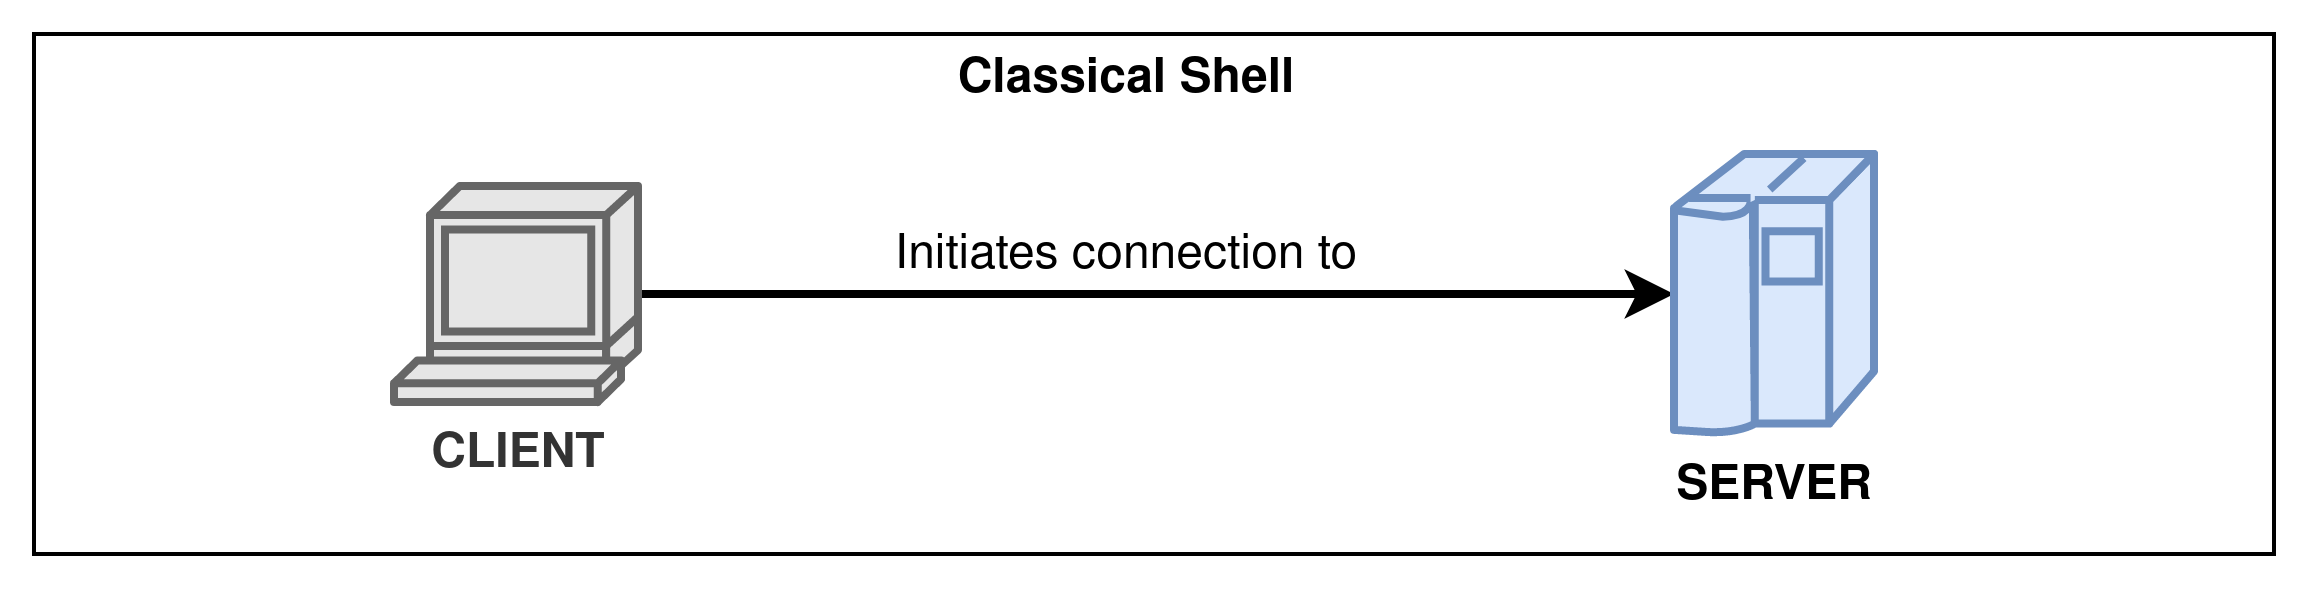 Classical shell connection scheme